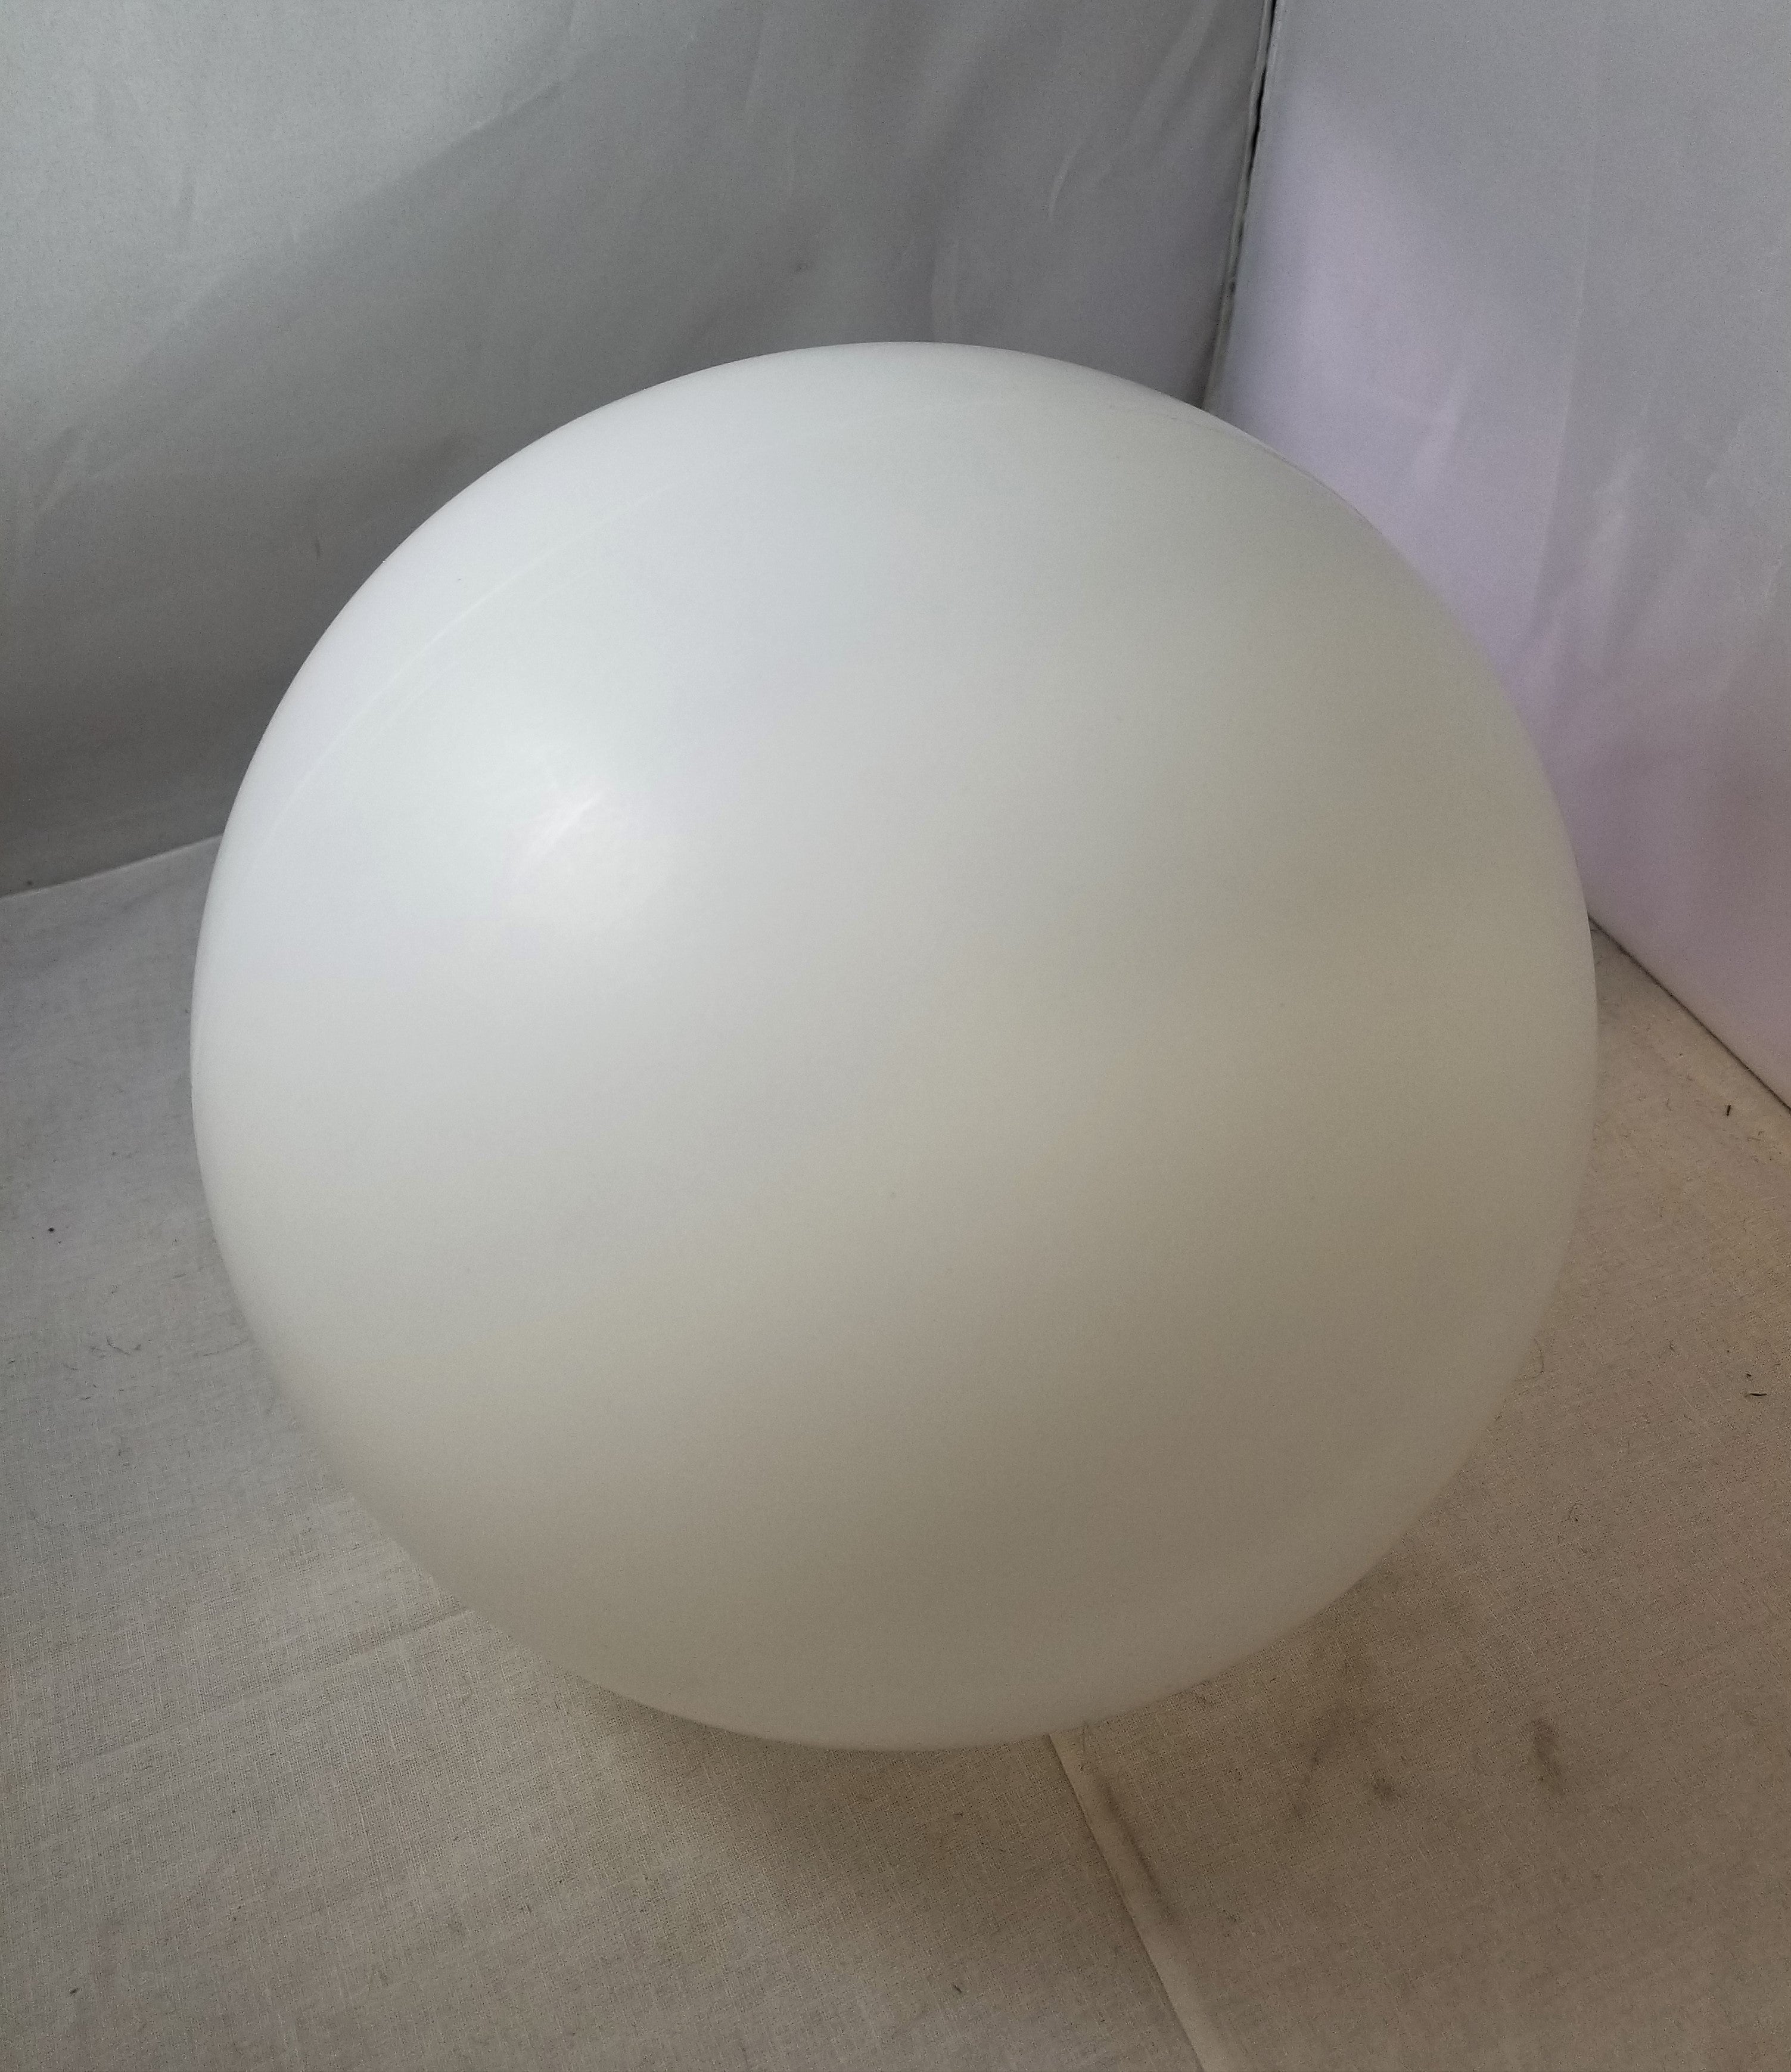 18" Neckless Plastic Globe with a 5-1/4" Hole (see more description)